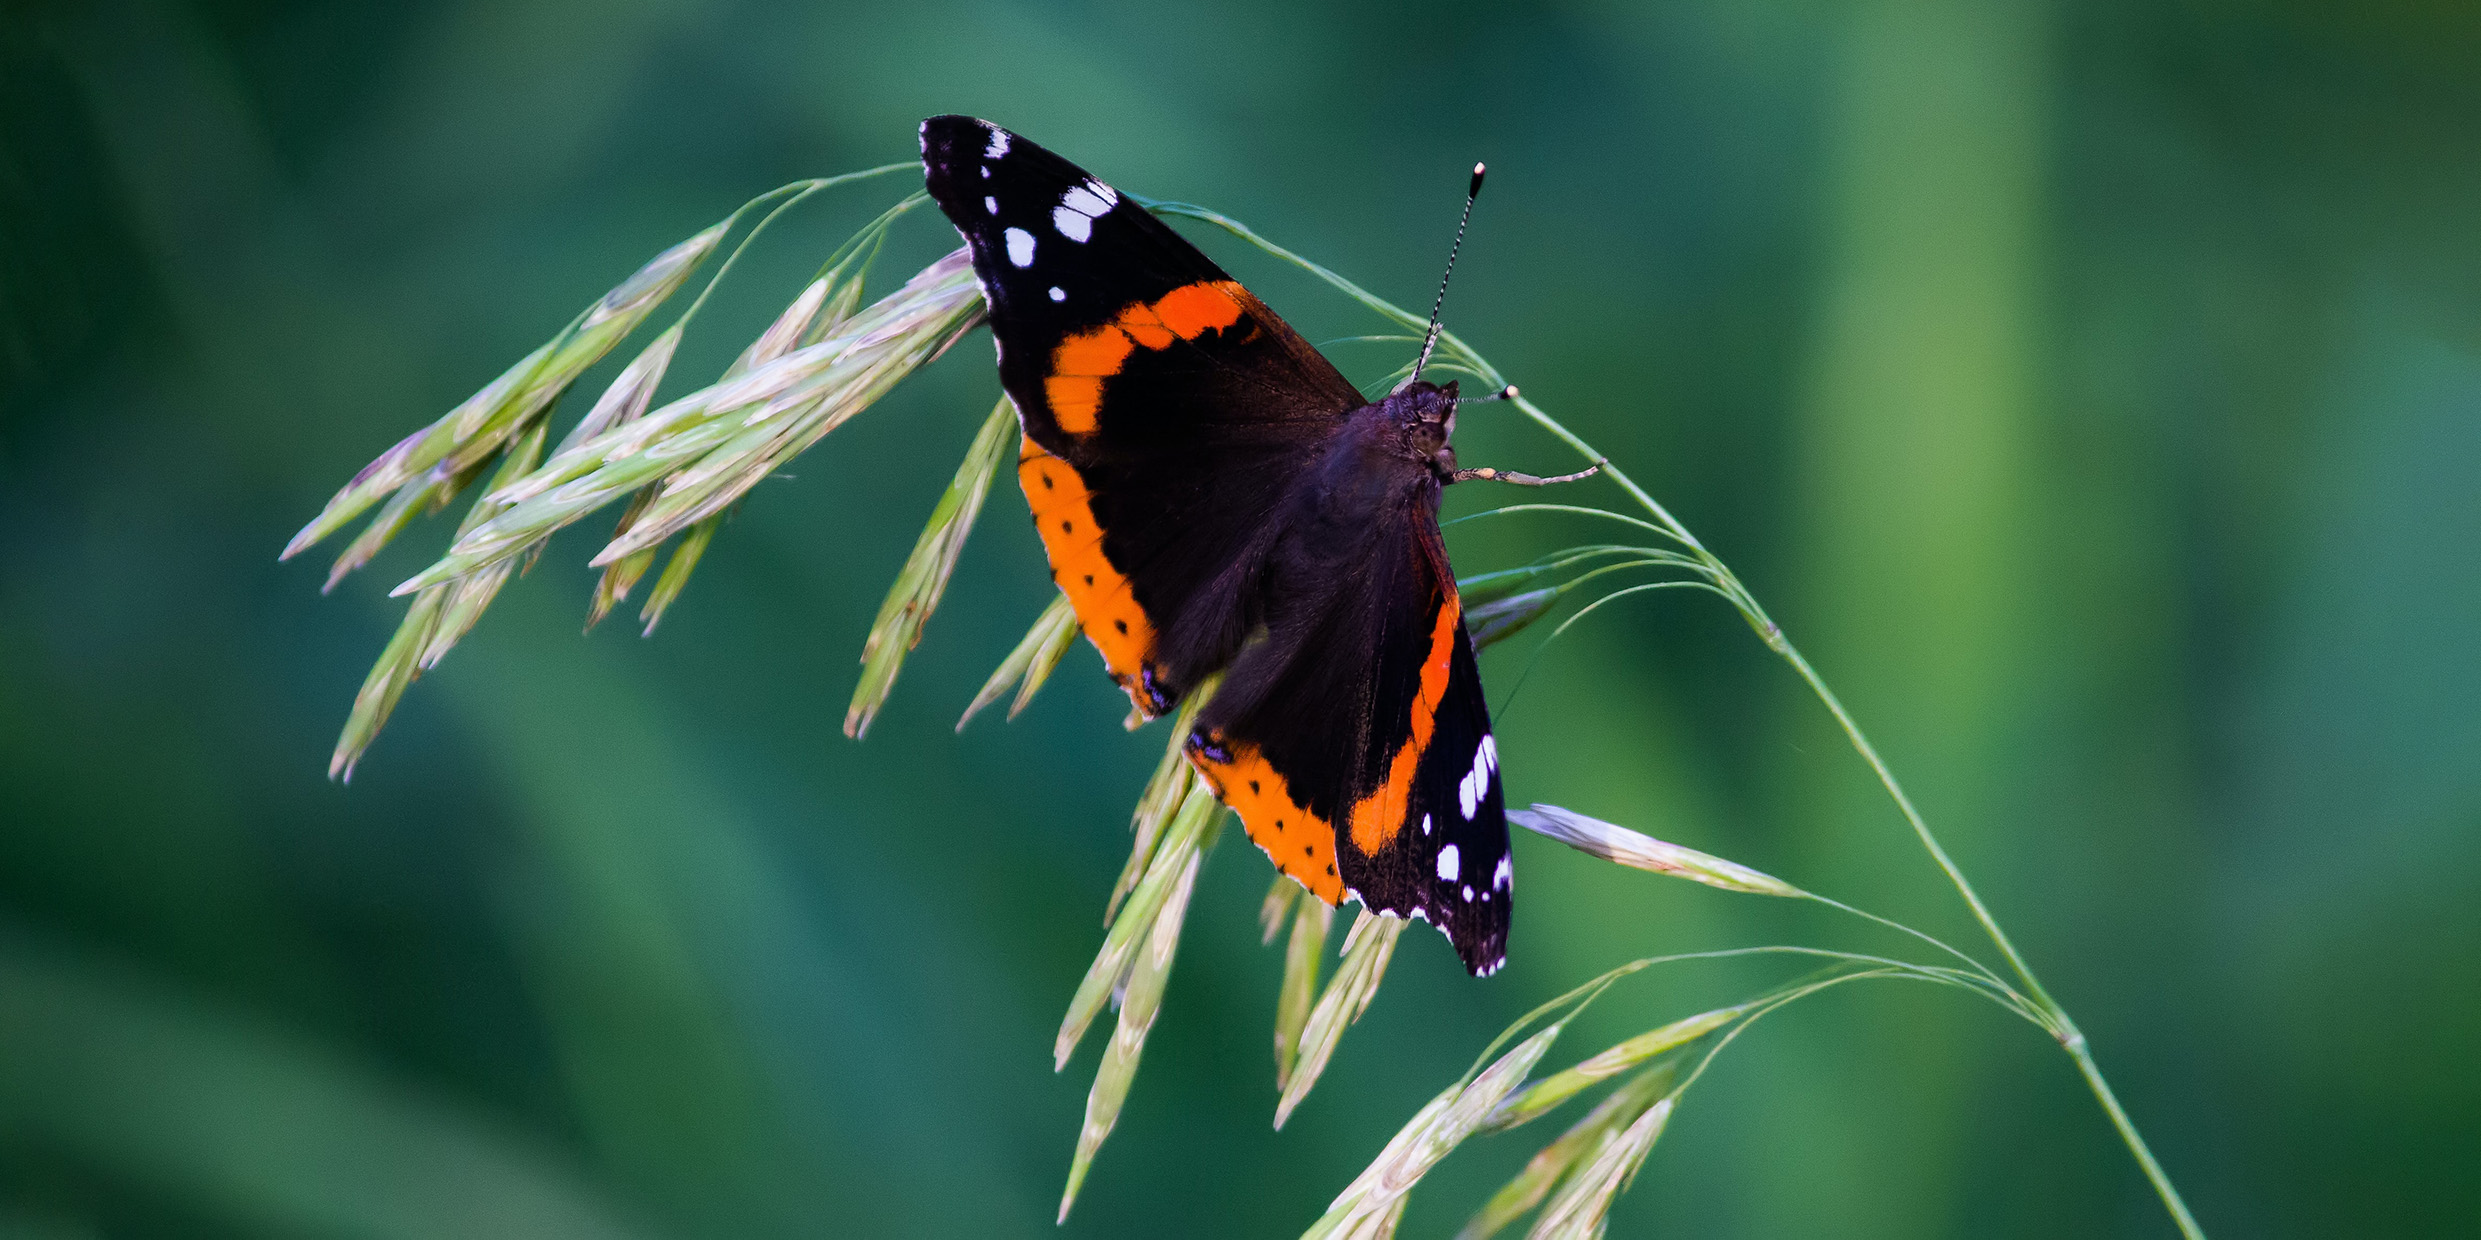 Image of a red admiral butterfly